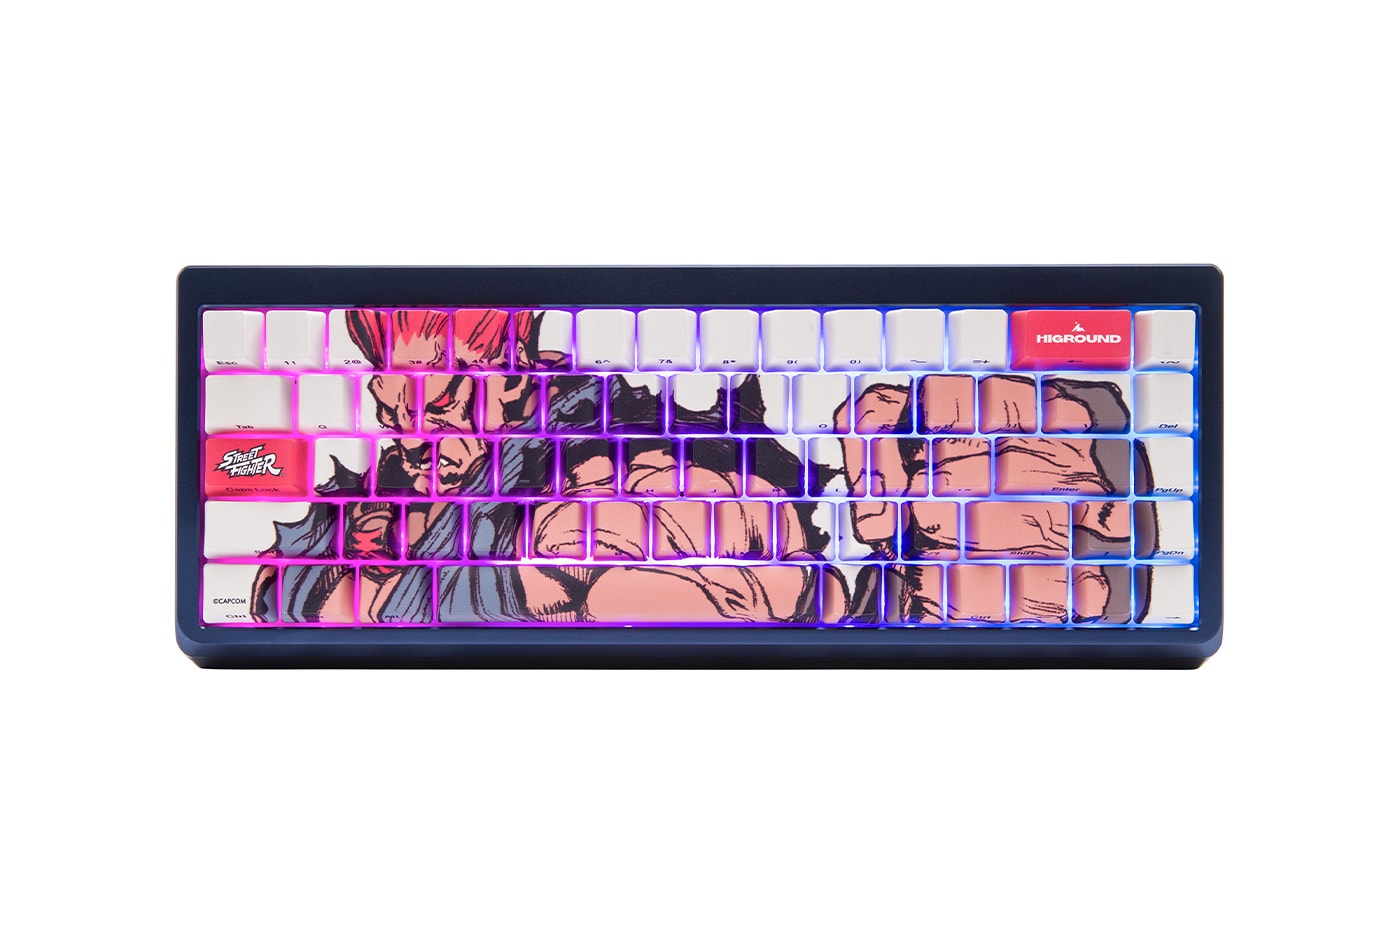 Higround Street Fighter basecamp 65 keyboard keycaps mouspad jellybag apparel Collaboration fighting game april 19 